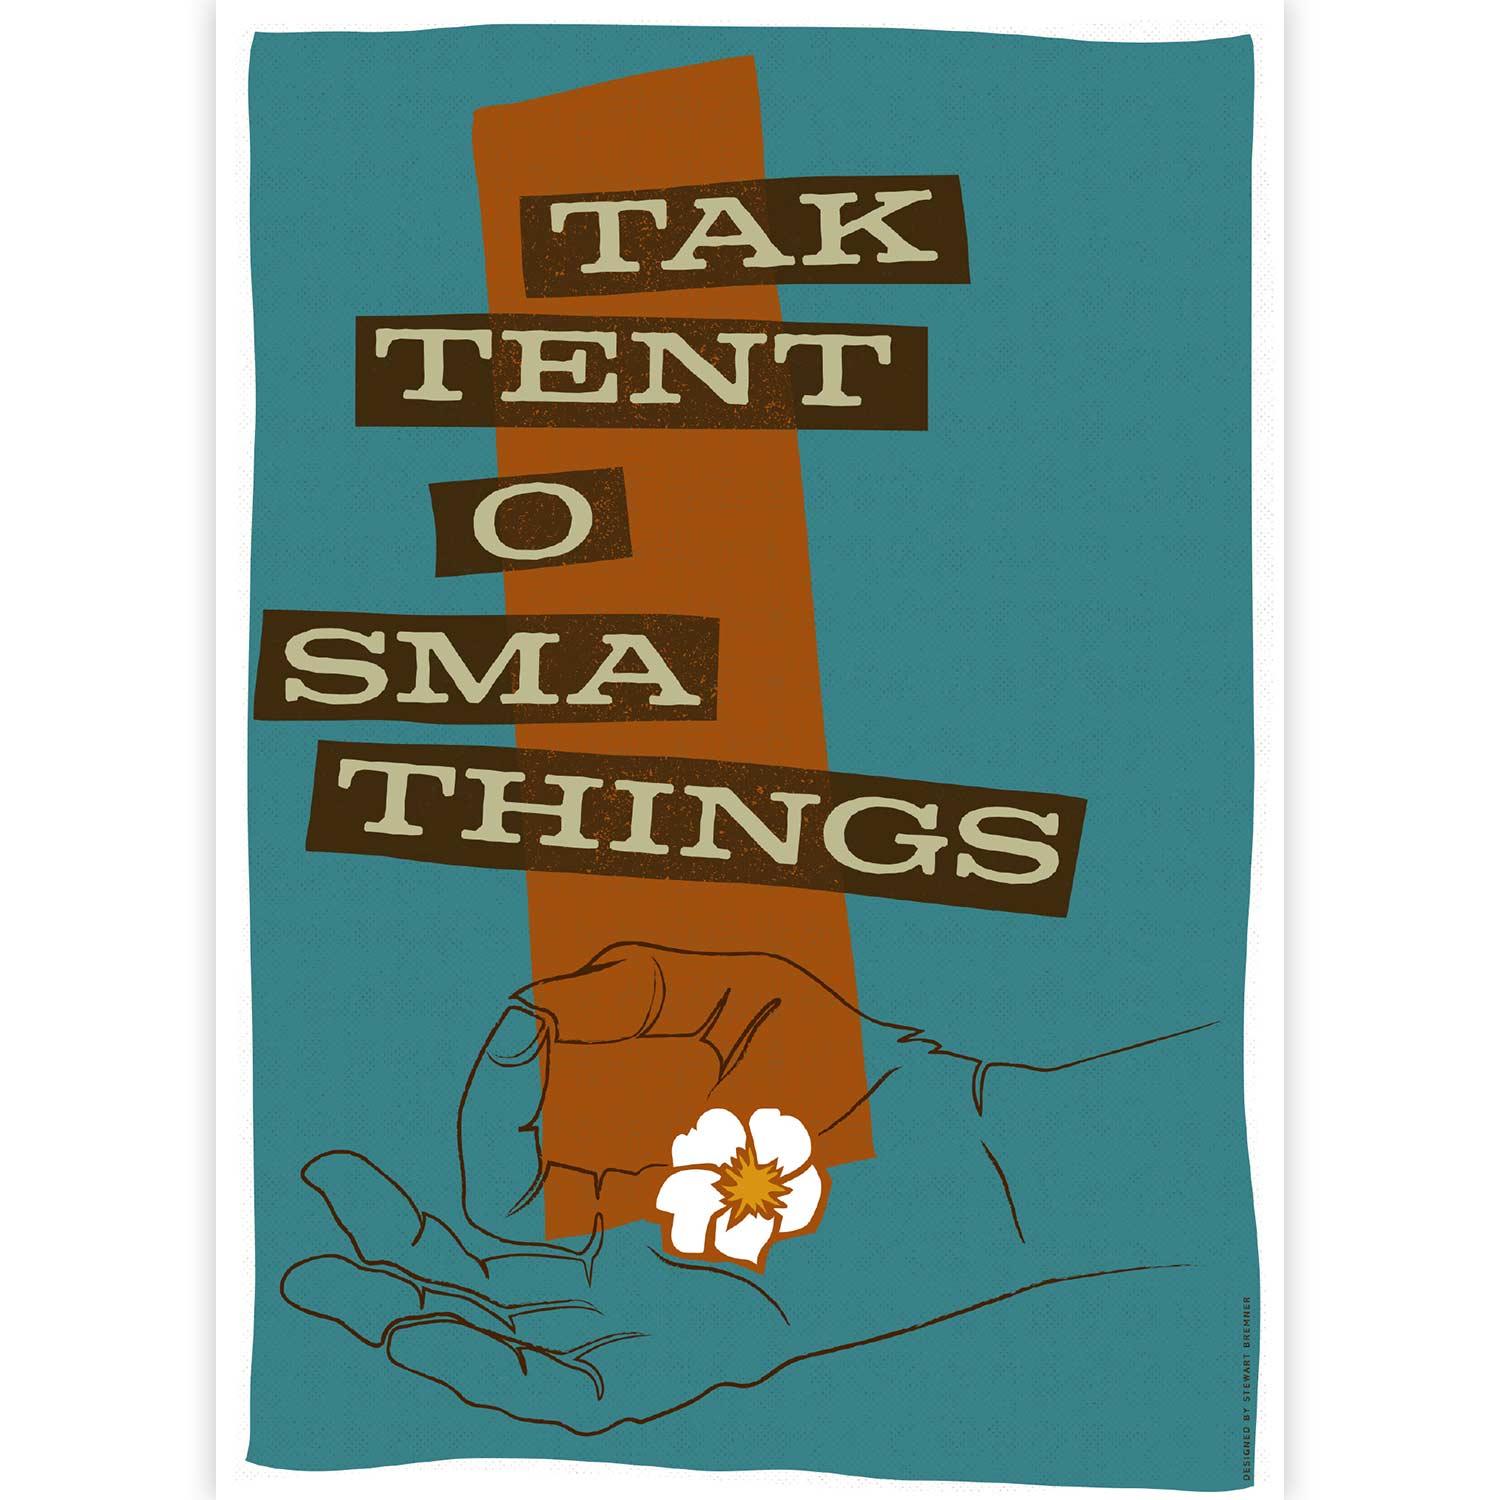 Tak Tent o Sma Things by Stewart Bremner